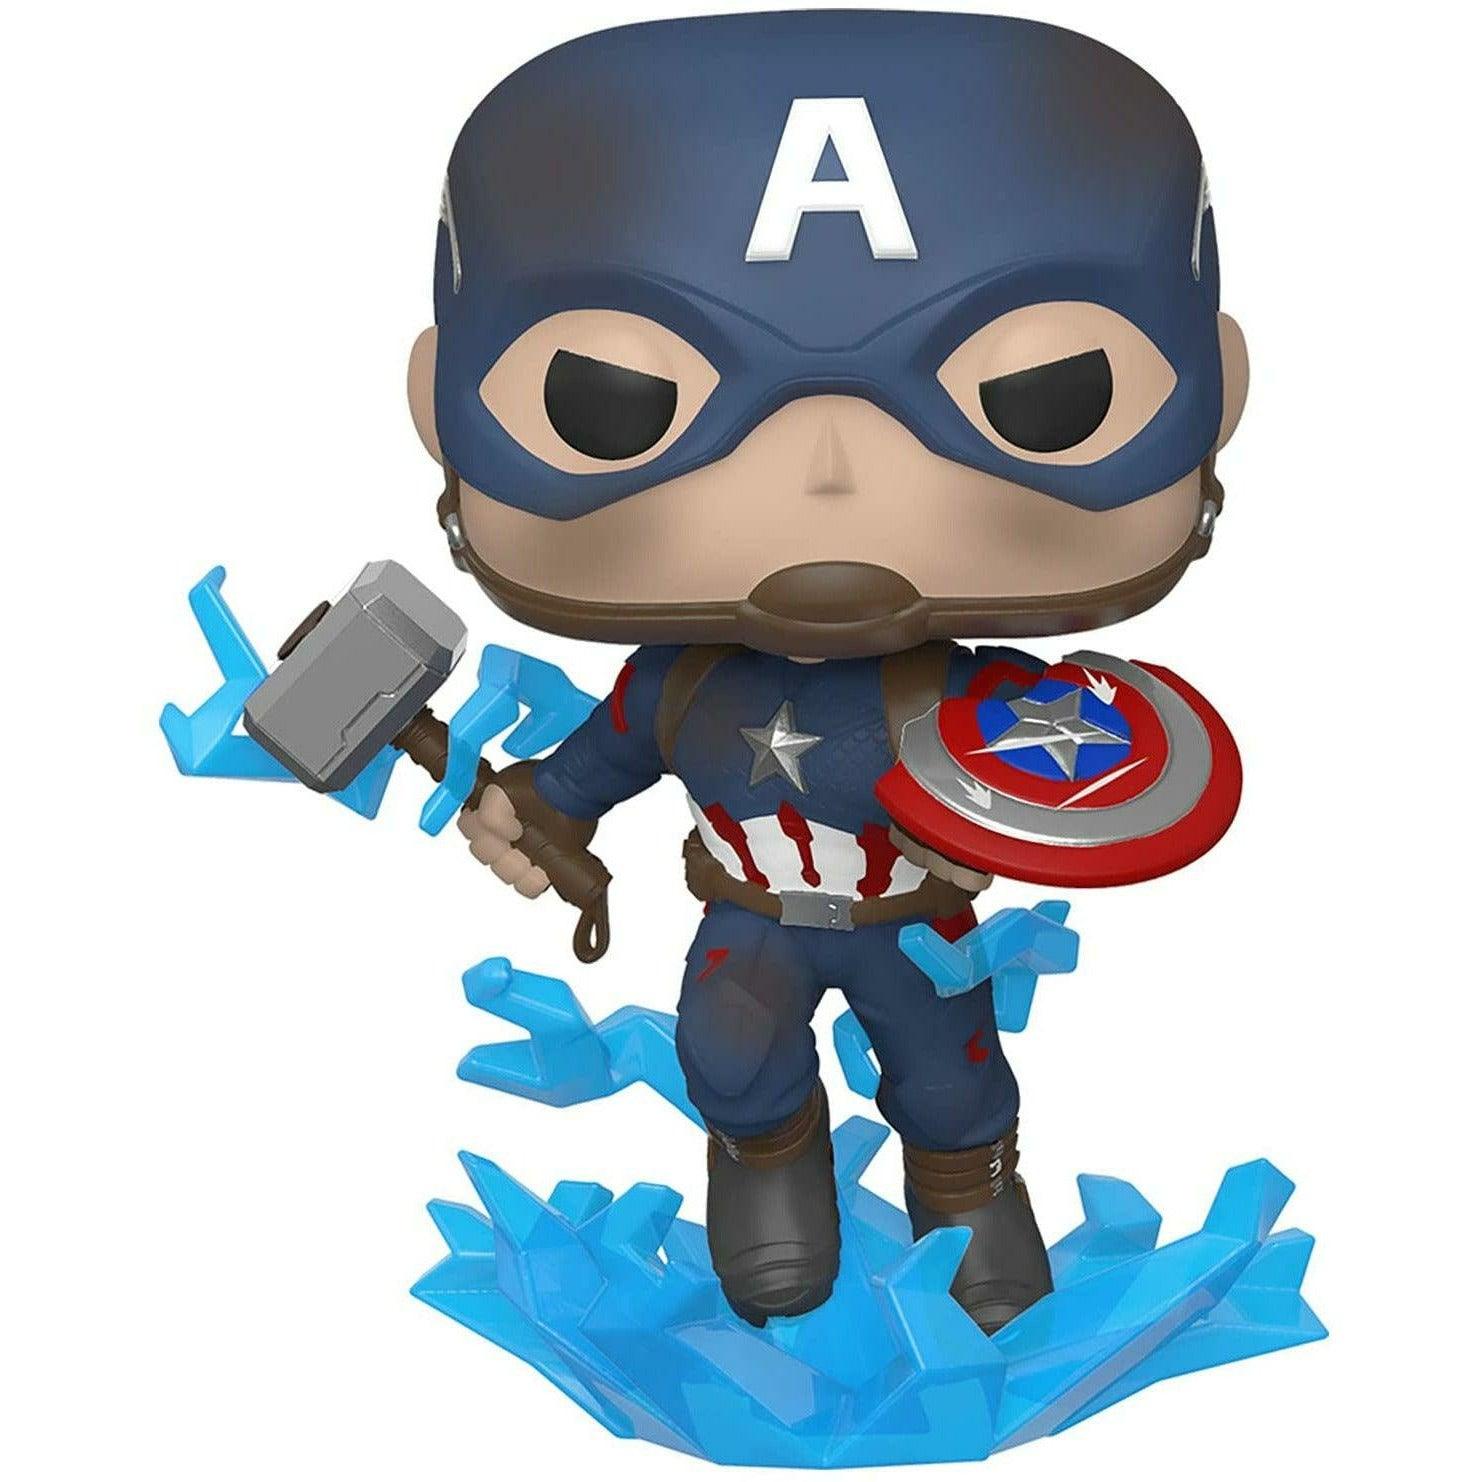 Funko Pop! Marvel Avengers Endgame - Captain America with Broken Shield & Mjoinir 3.75 Inches - BumbleToys - 18+, 4+ Years, 5-7 Years, Action Figures, Avengers, Boys, Captain America, Characters, Funko, Pre-Order